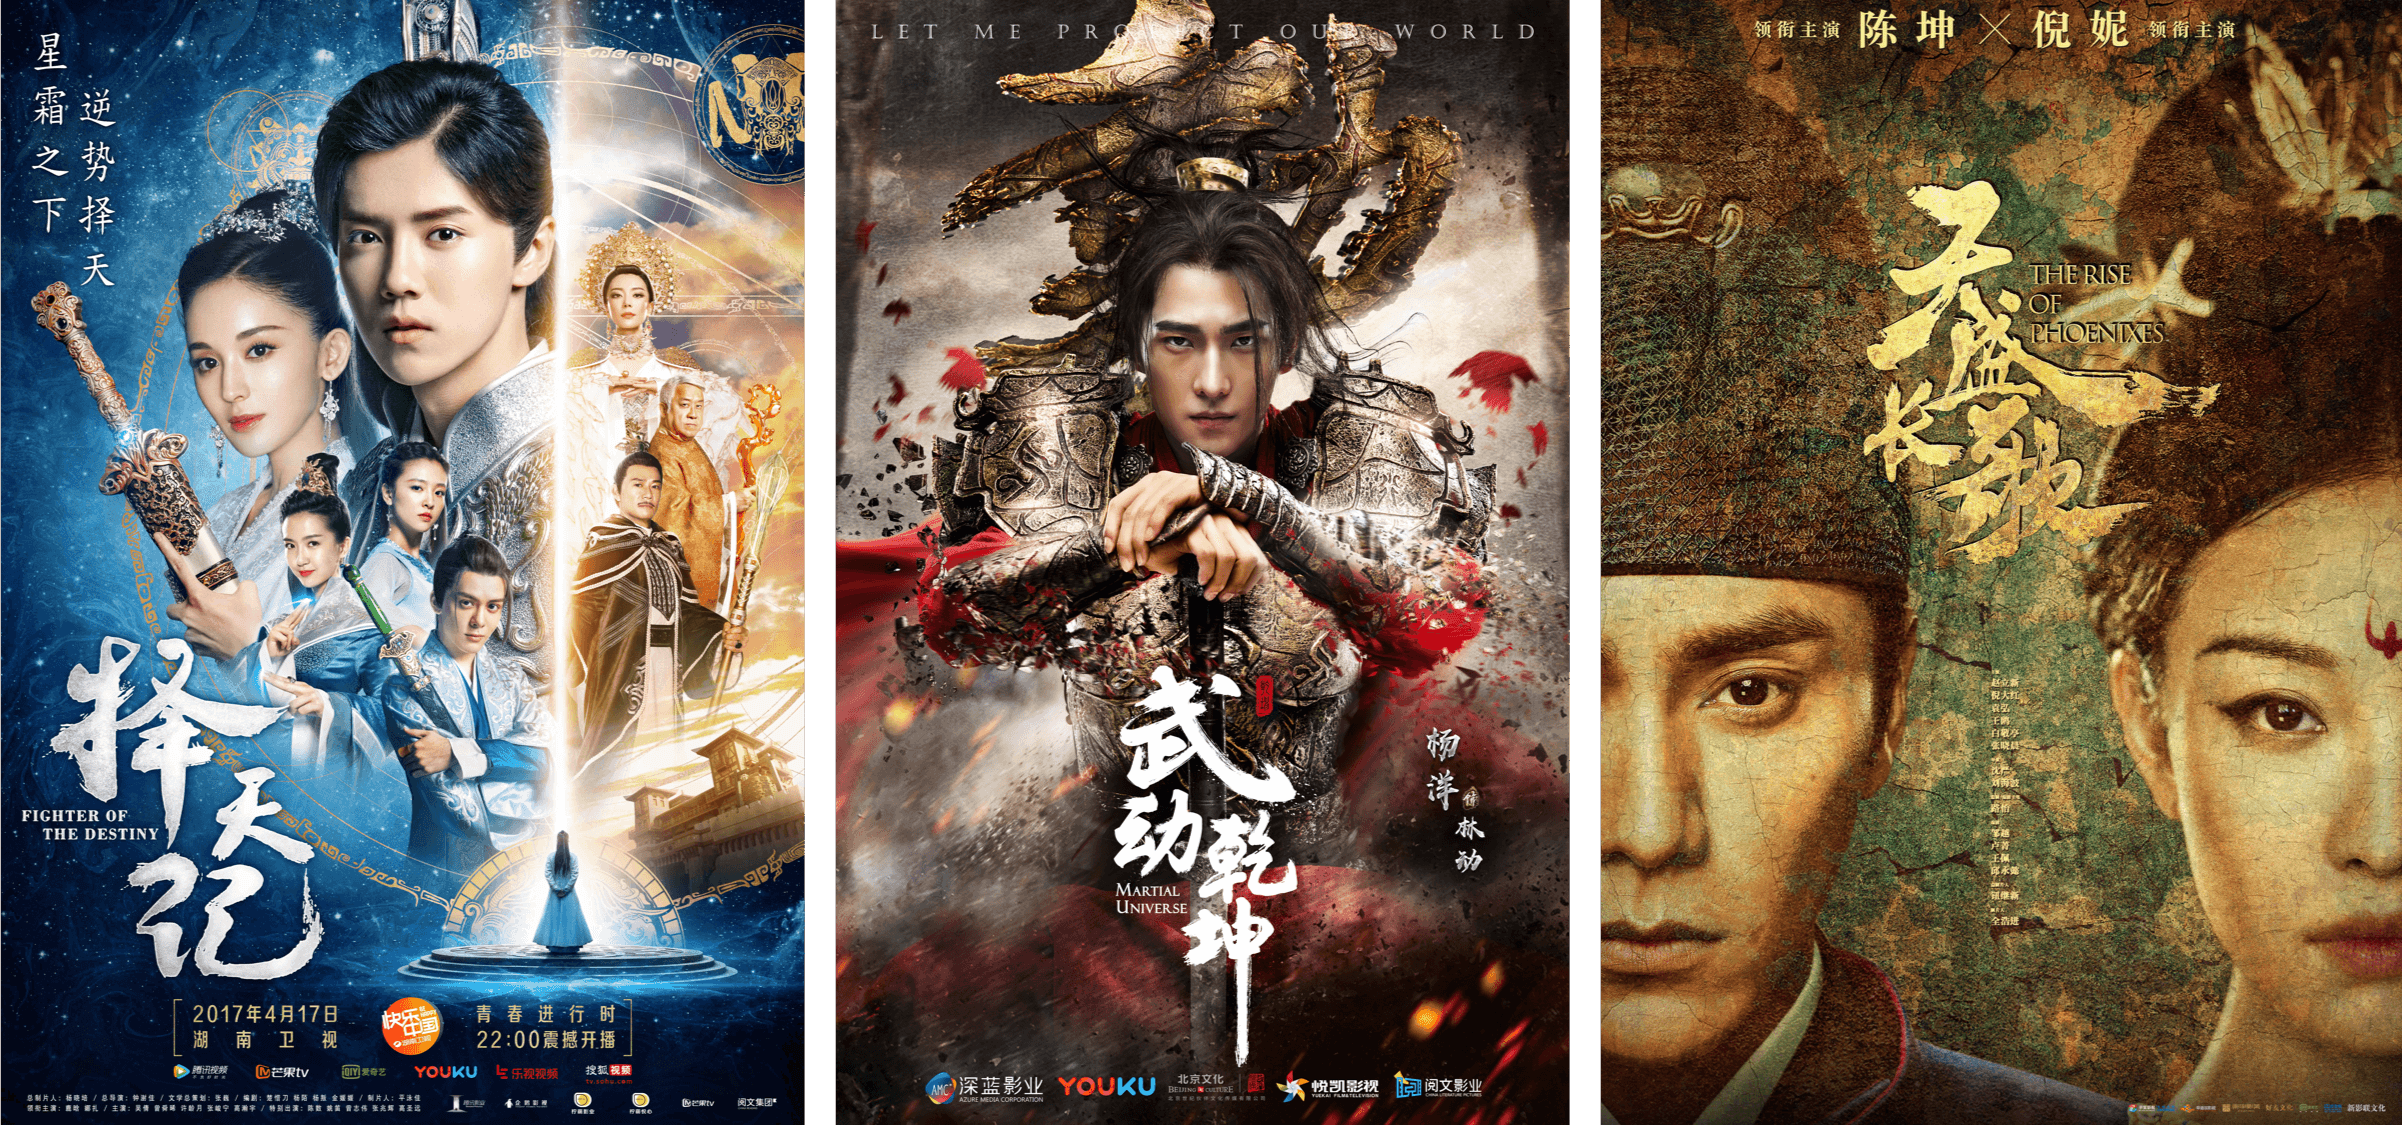 ADAPTATIONS. Webnovel is the overseas portal of China Literature, which owns intellectual properties such as ‘Fighter of the Destiny,’ ‘Martial Universe,’ and ‘The Rise of Phoenixes.’ These Chinese TV dramas are on the air in the Philippines. Photo courtesy of Webnovel 